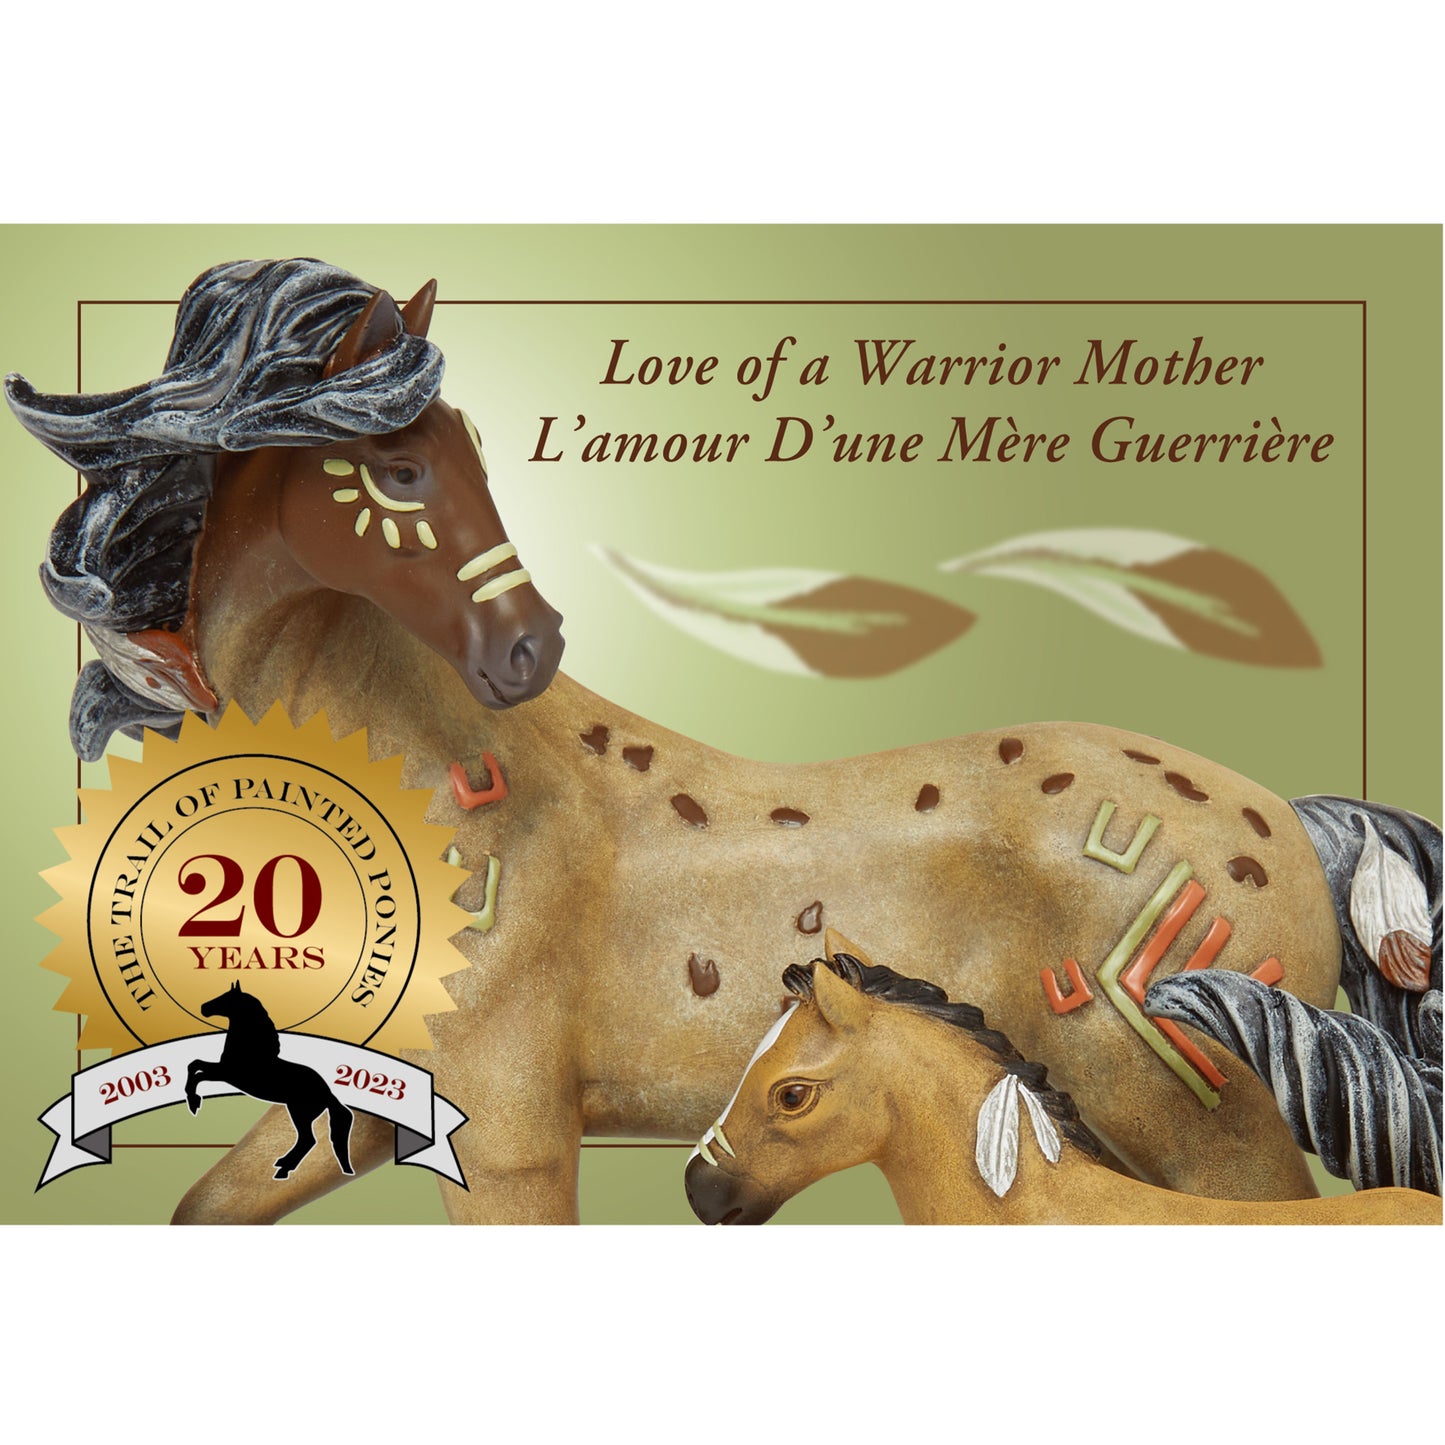 Love of a Warrior Mother - Standard Edition